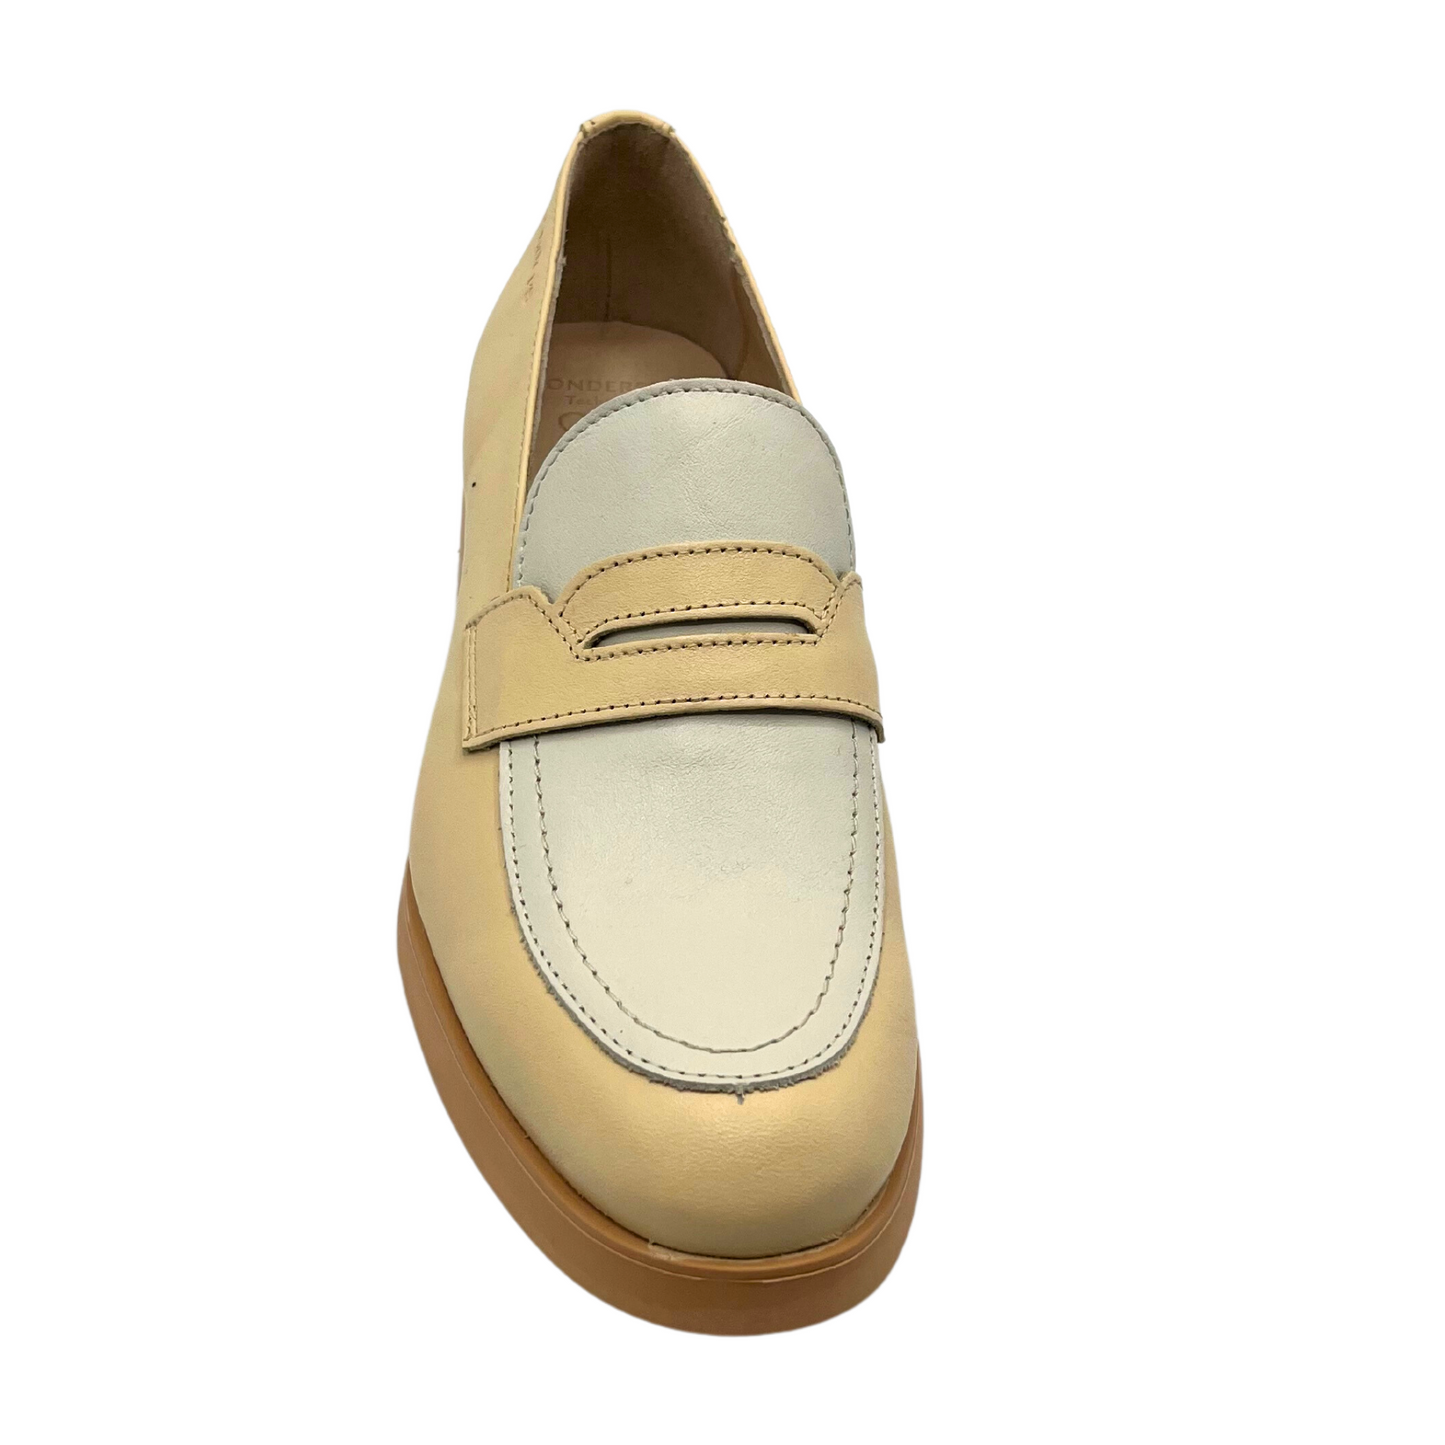 Top down view of a slip on loafer in a two-tone leather.  Natural leather around the body of the shoe and a light taupe over the taupe